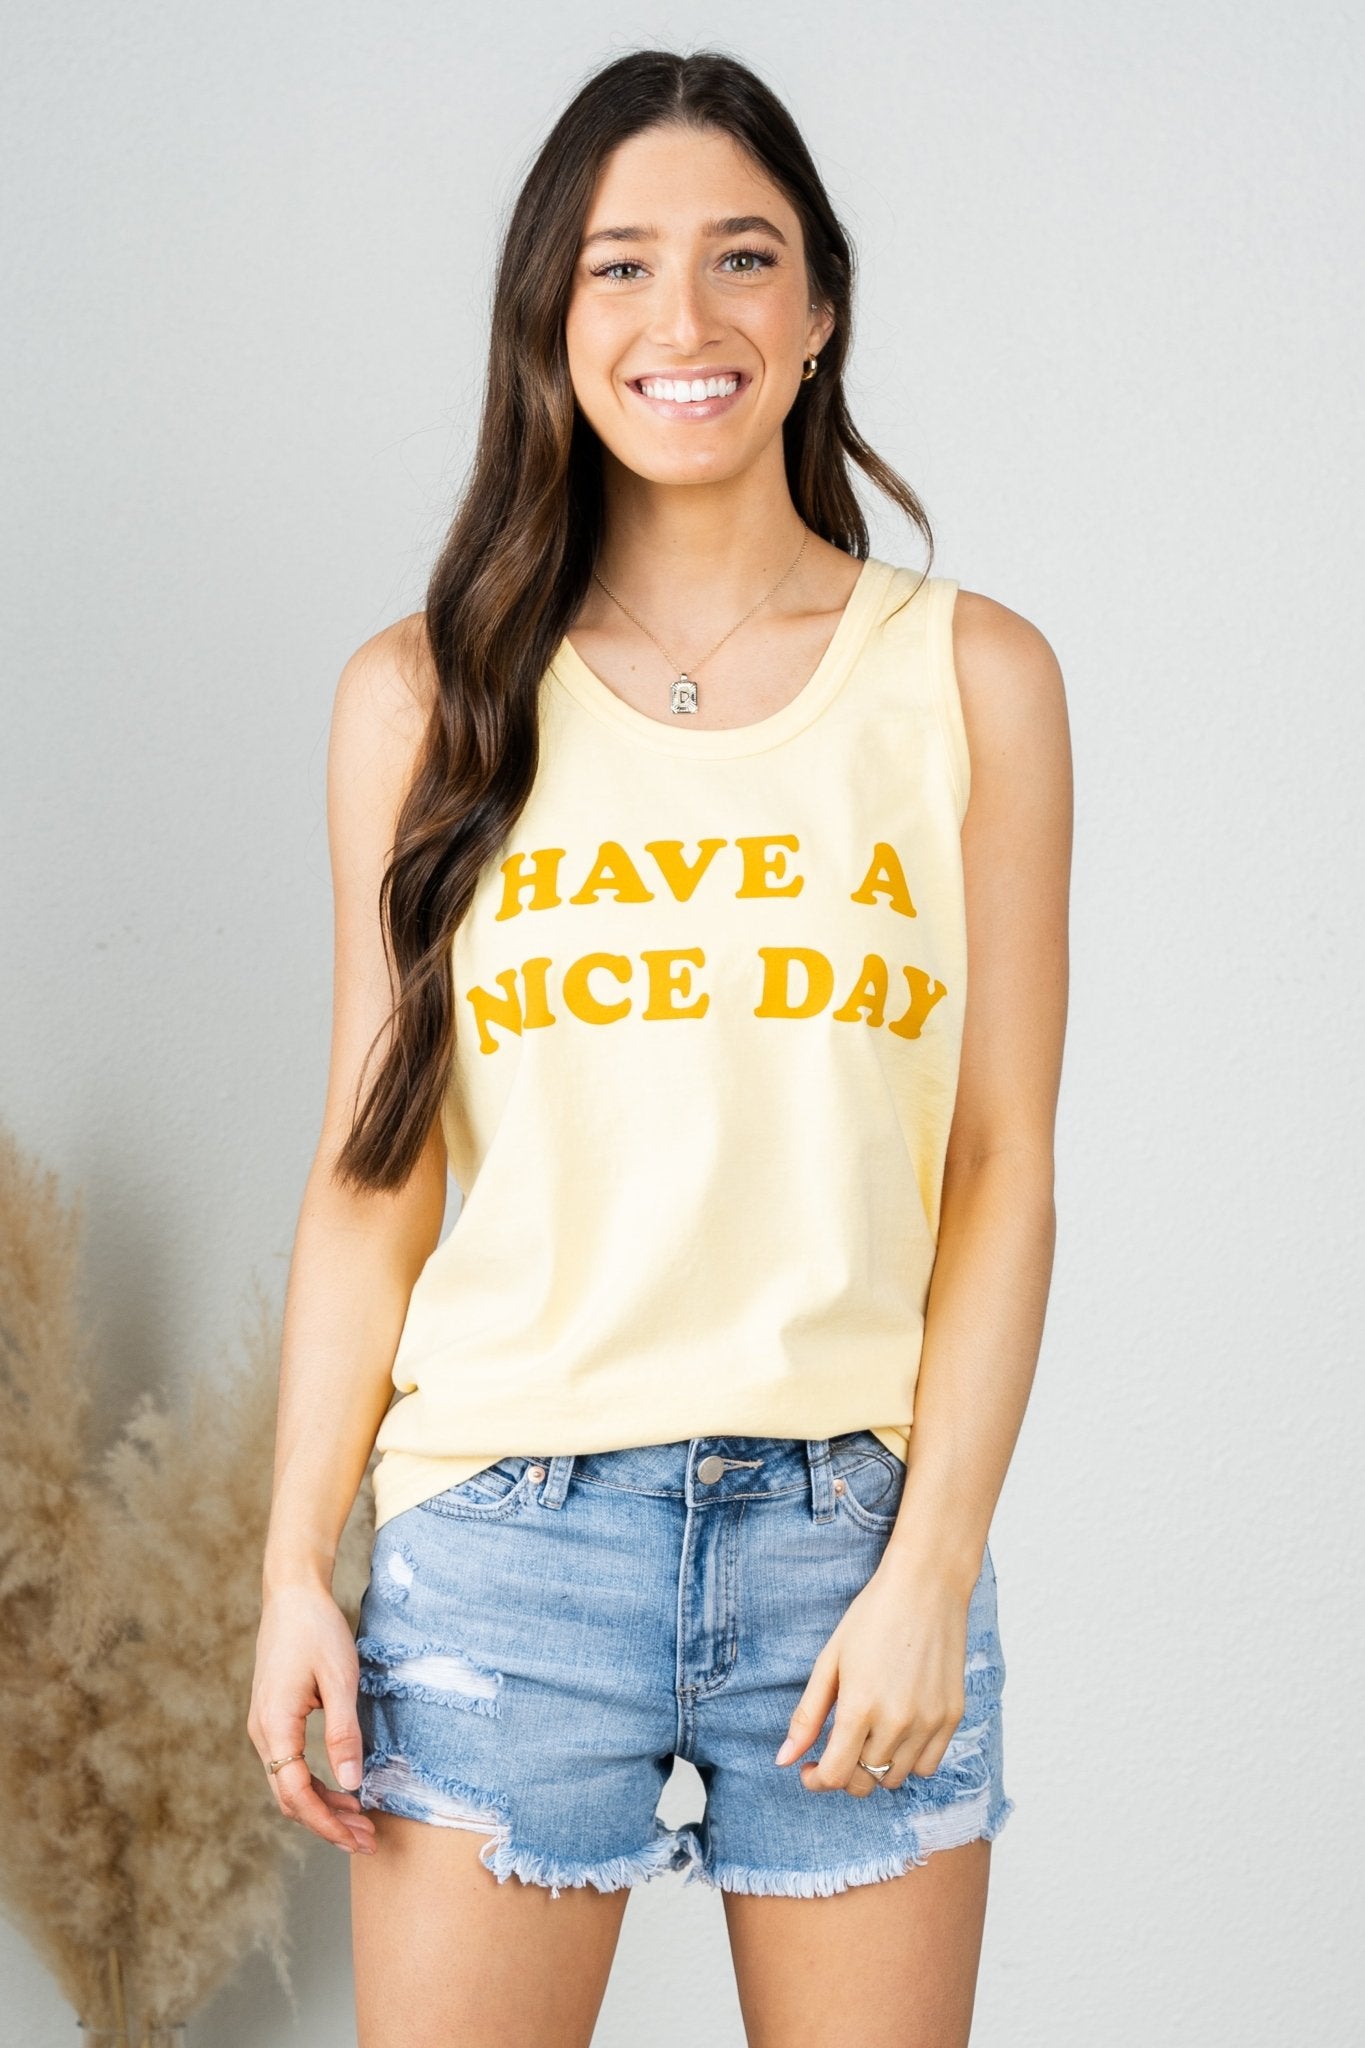 Have a nice day washed tank top yellow - Stylish Tank Top - Trendy Summer Lake T-Shirts and Tank Tops at Lush Fashion Lounge Boutique in Oklahoma City